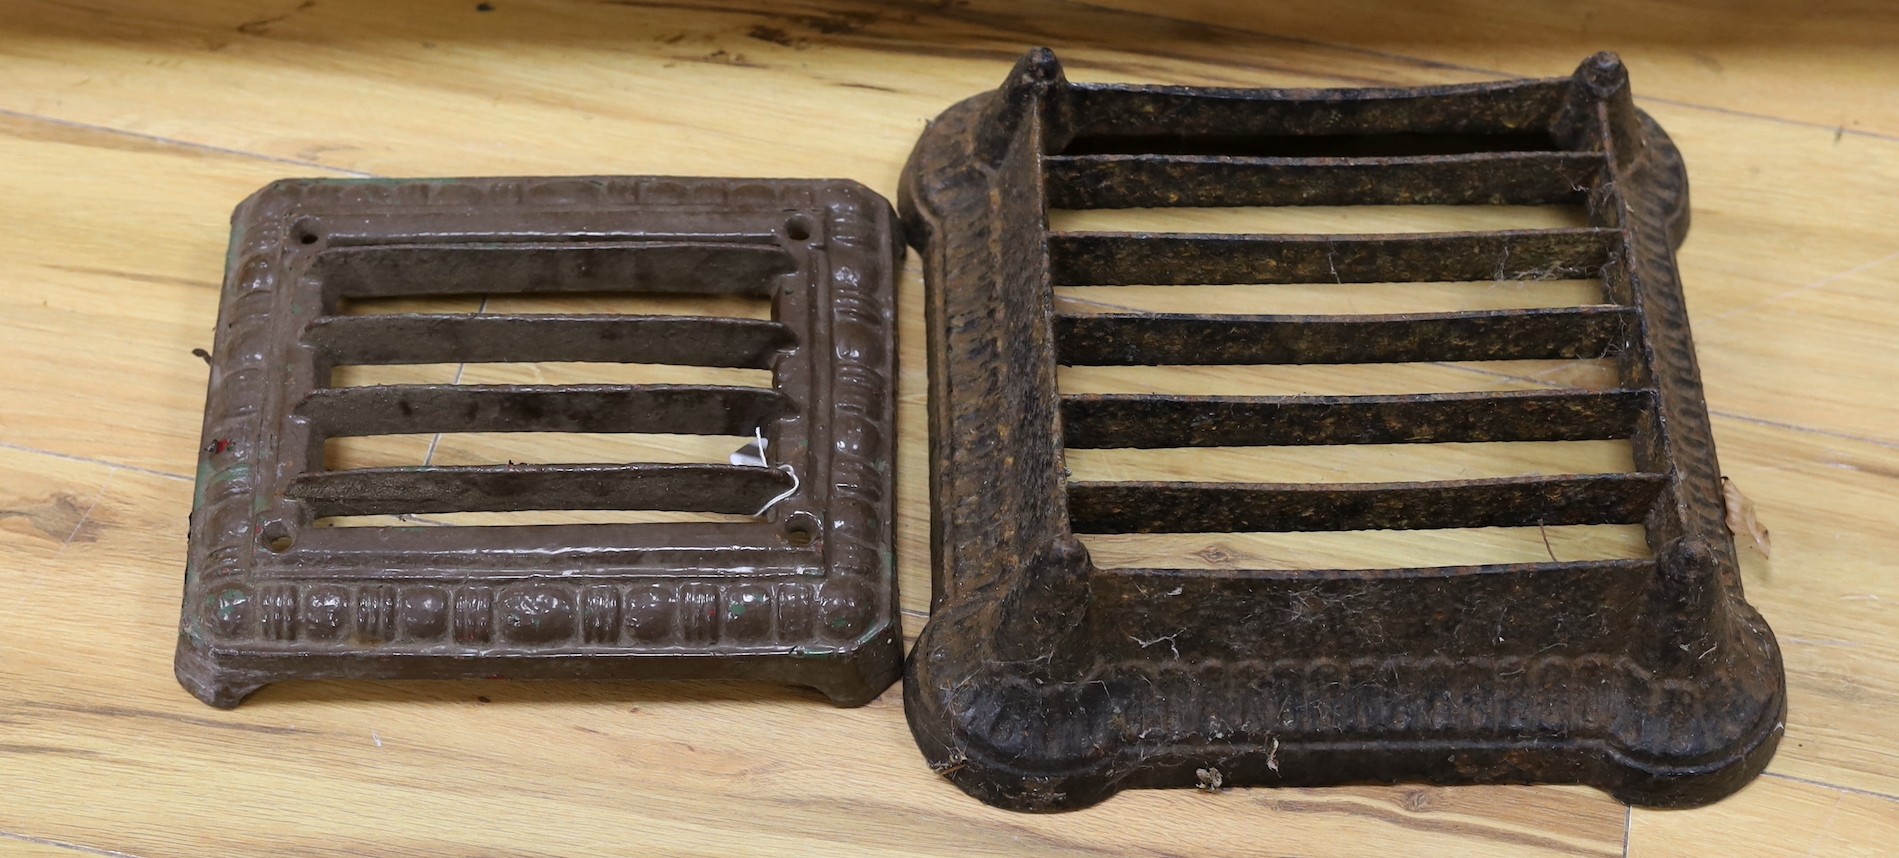 Two cast iron grille boot scrapers